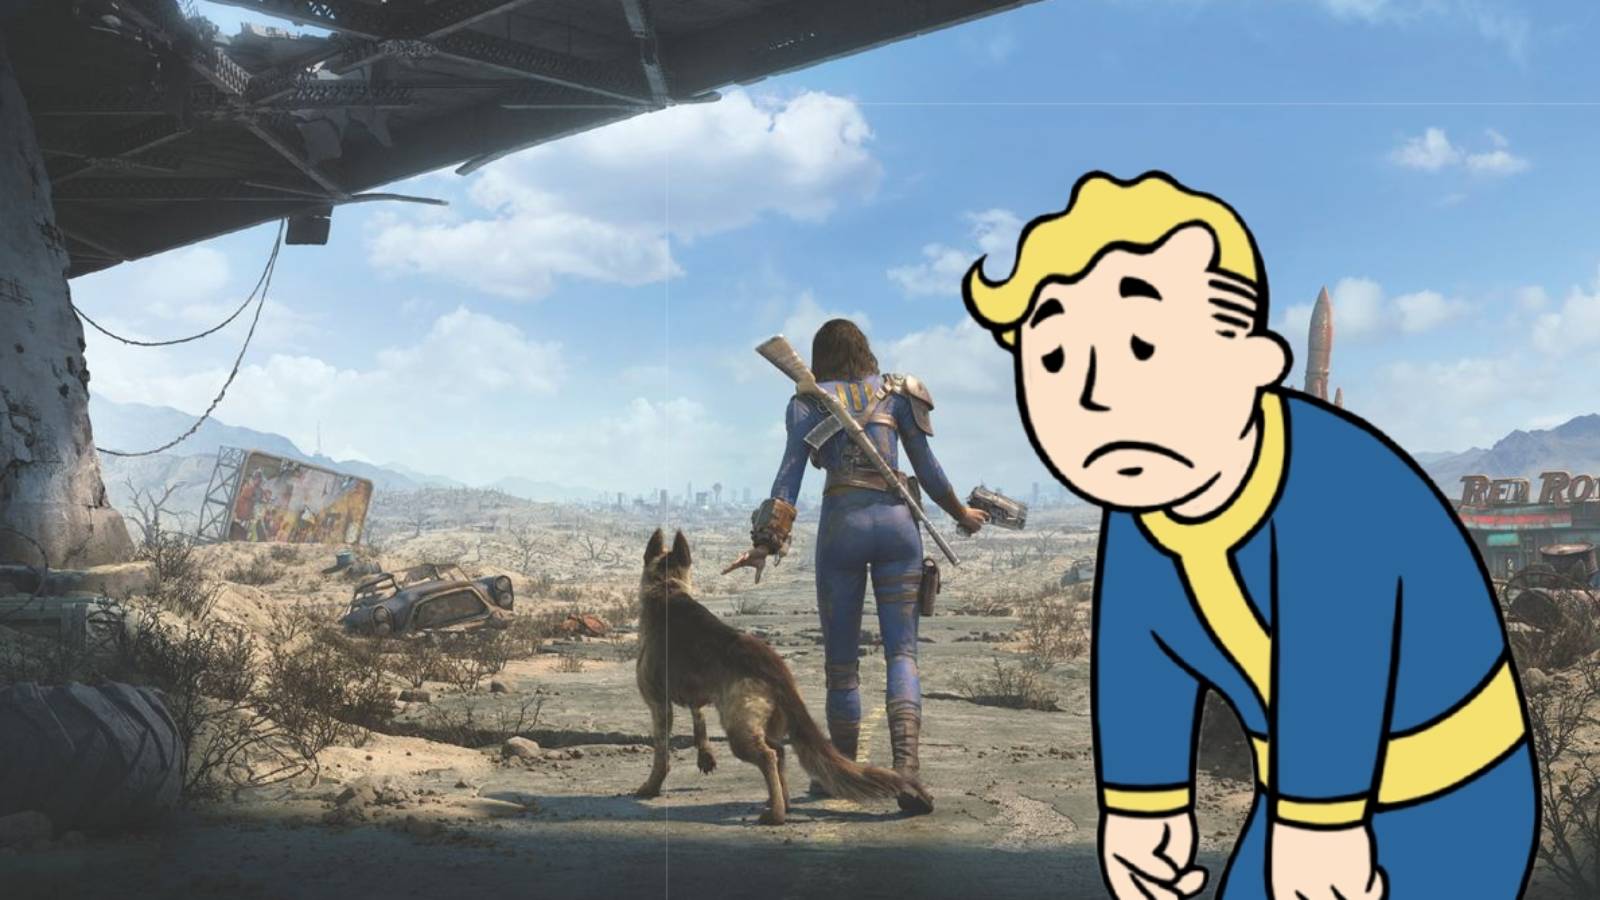 Fallout 4 image with Vault Boy frowning